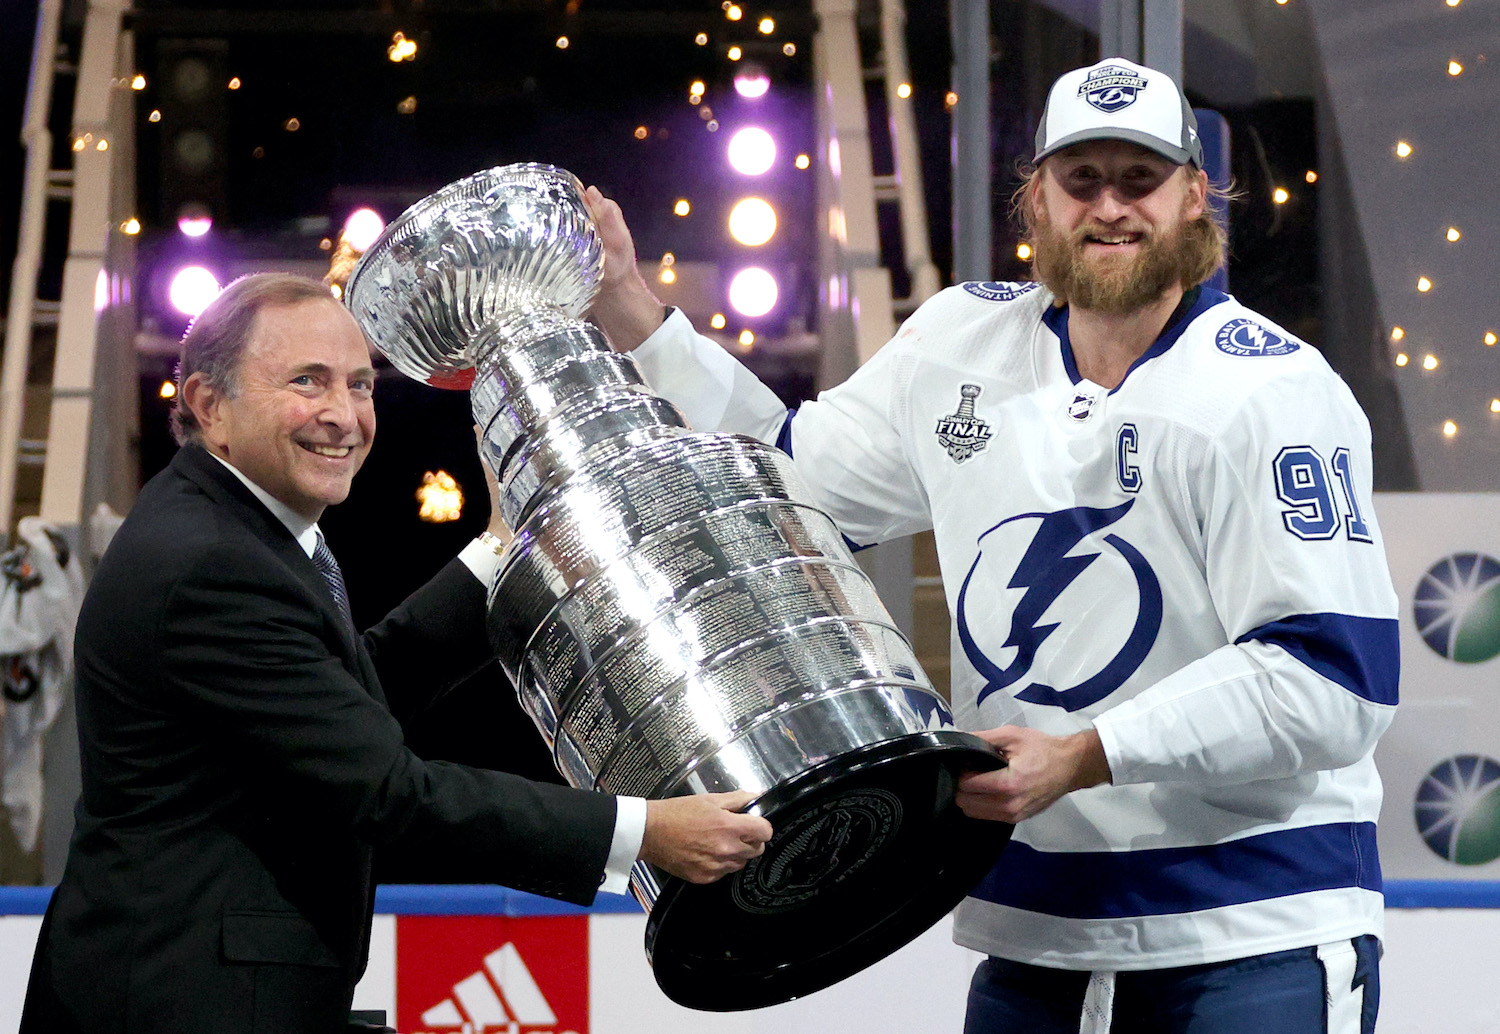 https://www.sportscasting.com/wp-content/uploads/2021/07/Stanley-Cup-Name.jpg?w=1200